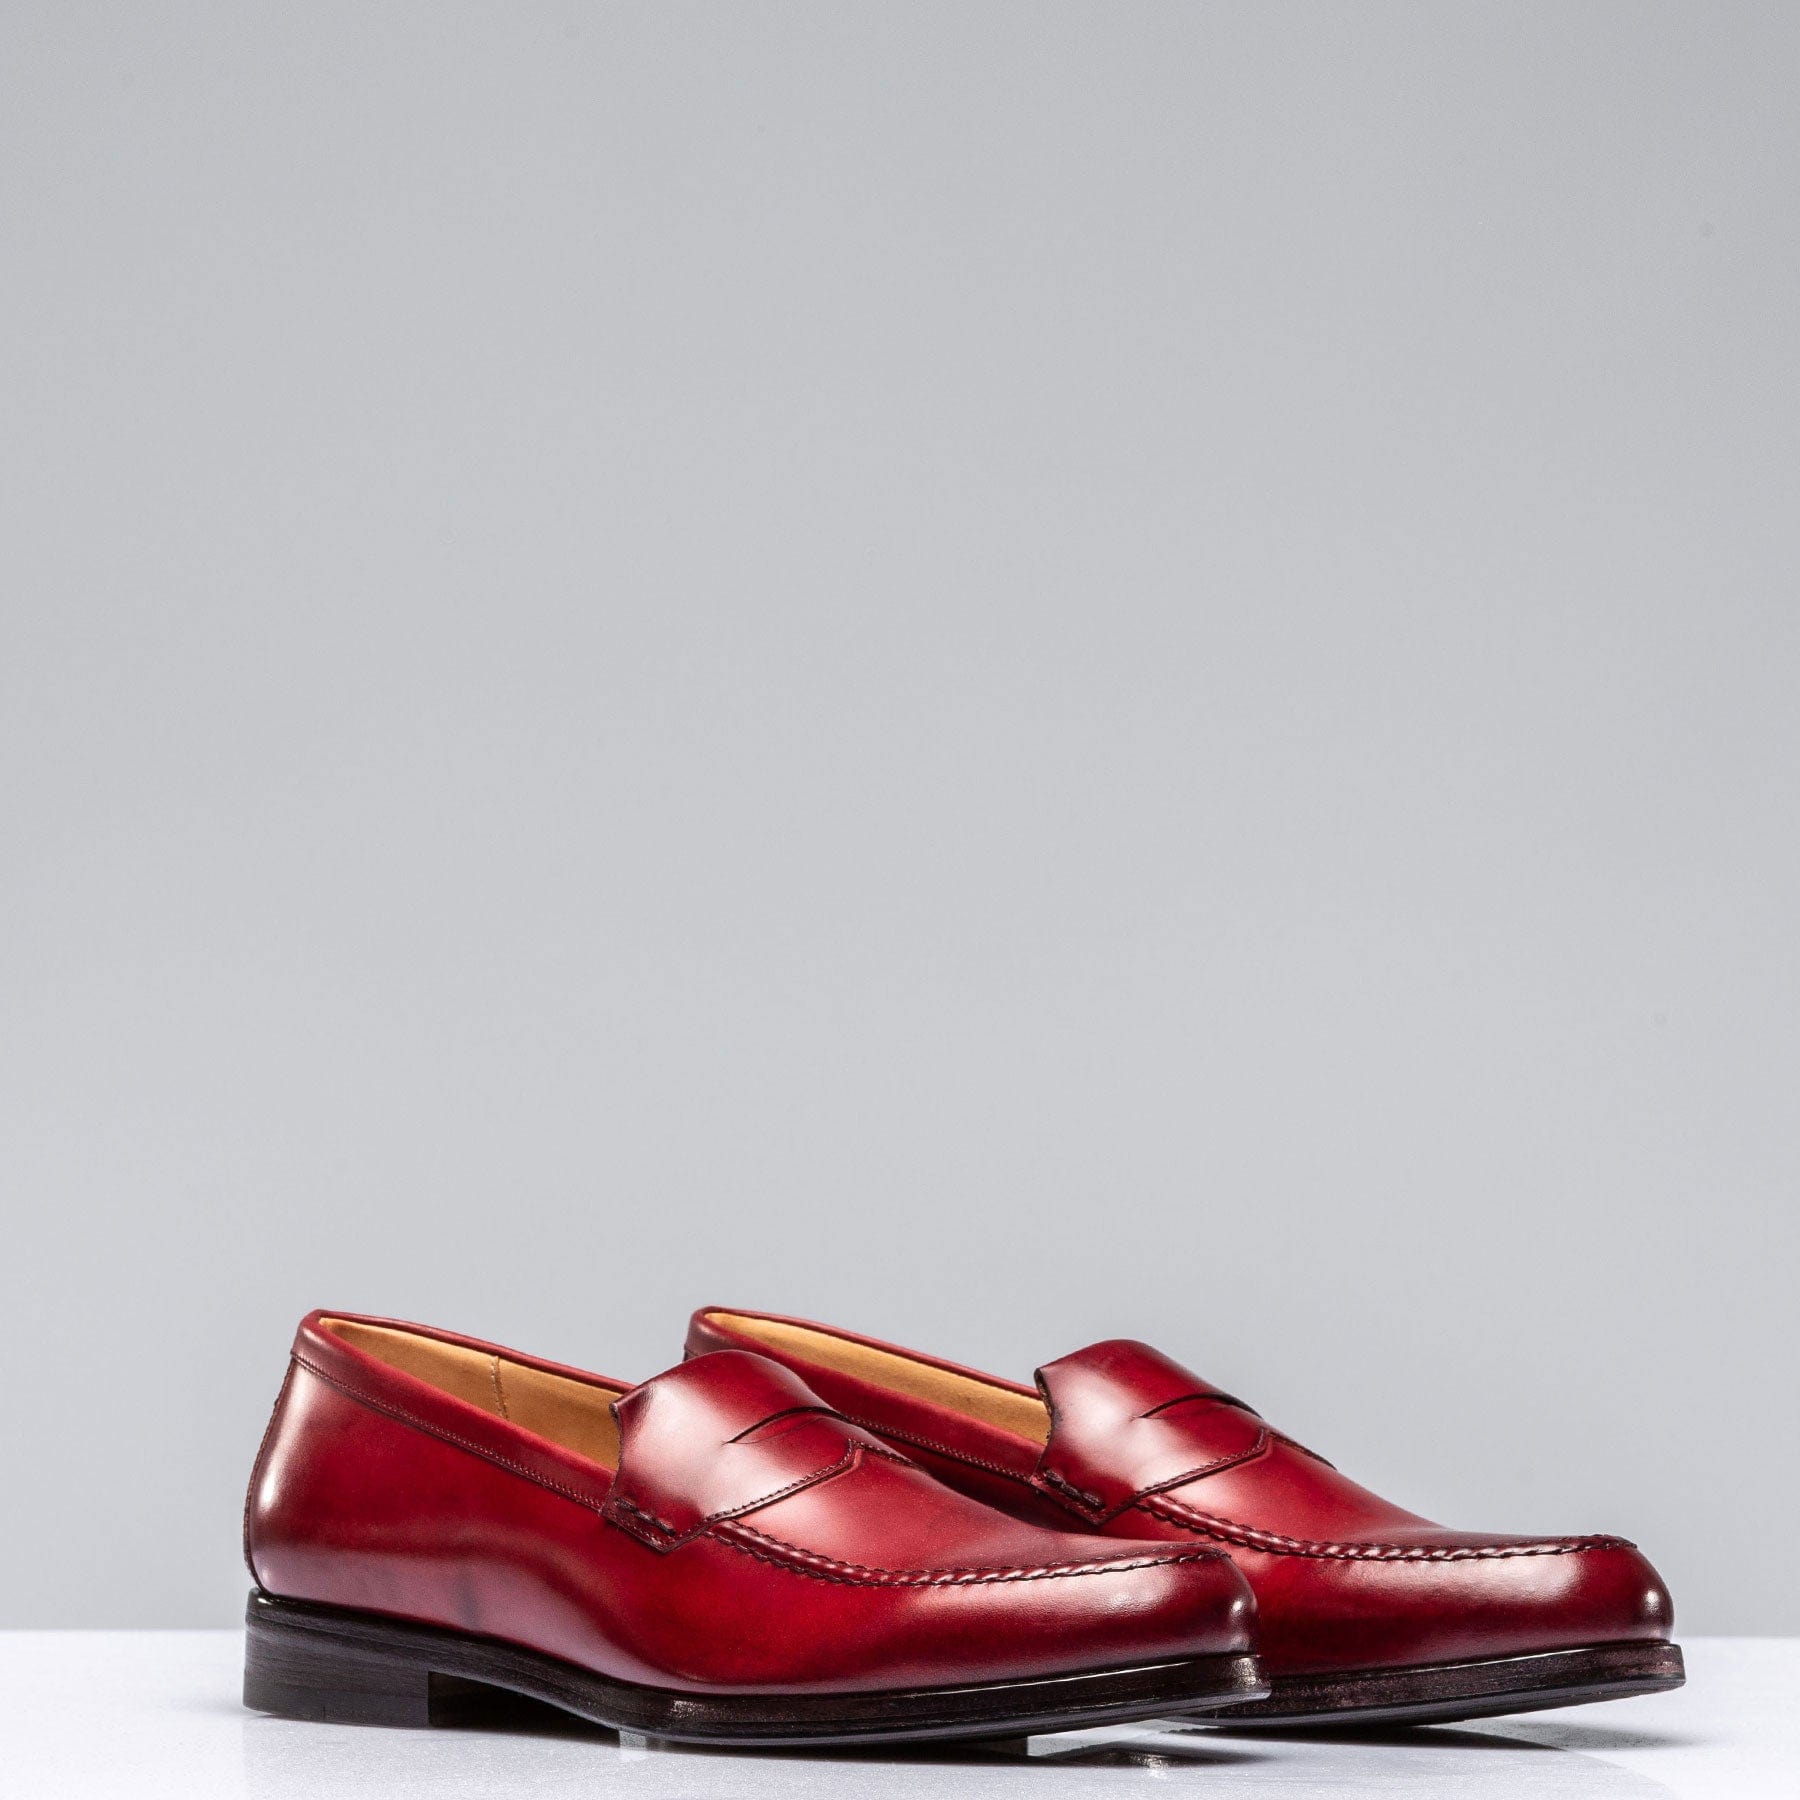 Lucro Loafer In Cherry Antique - AXEL'S